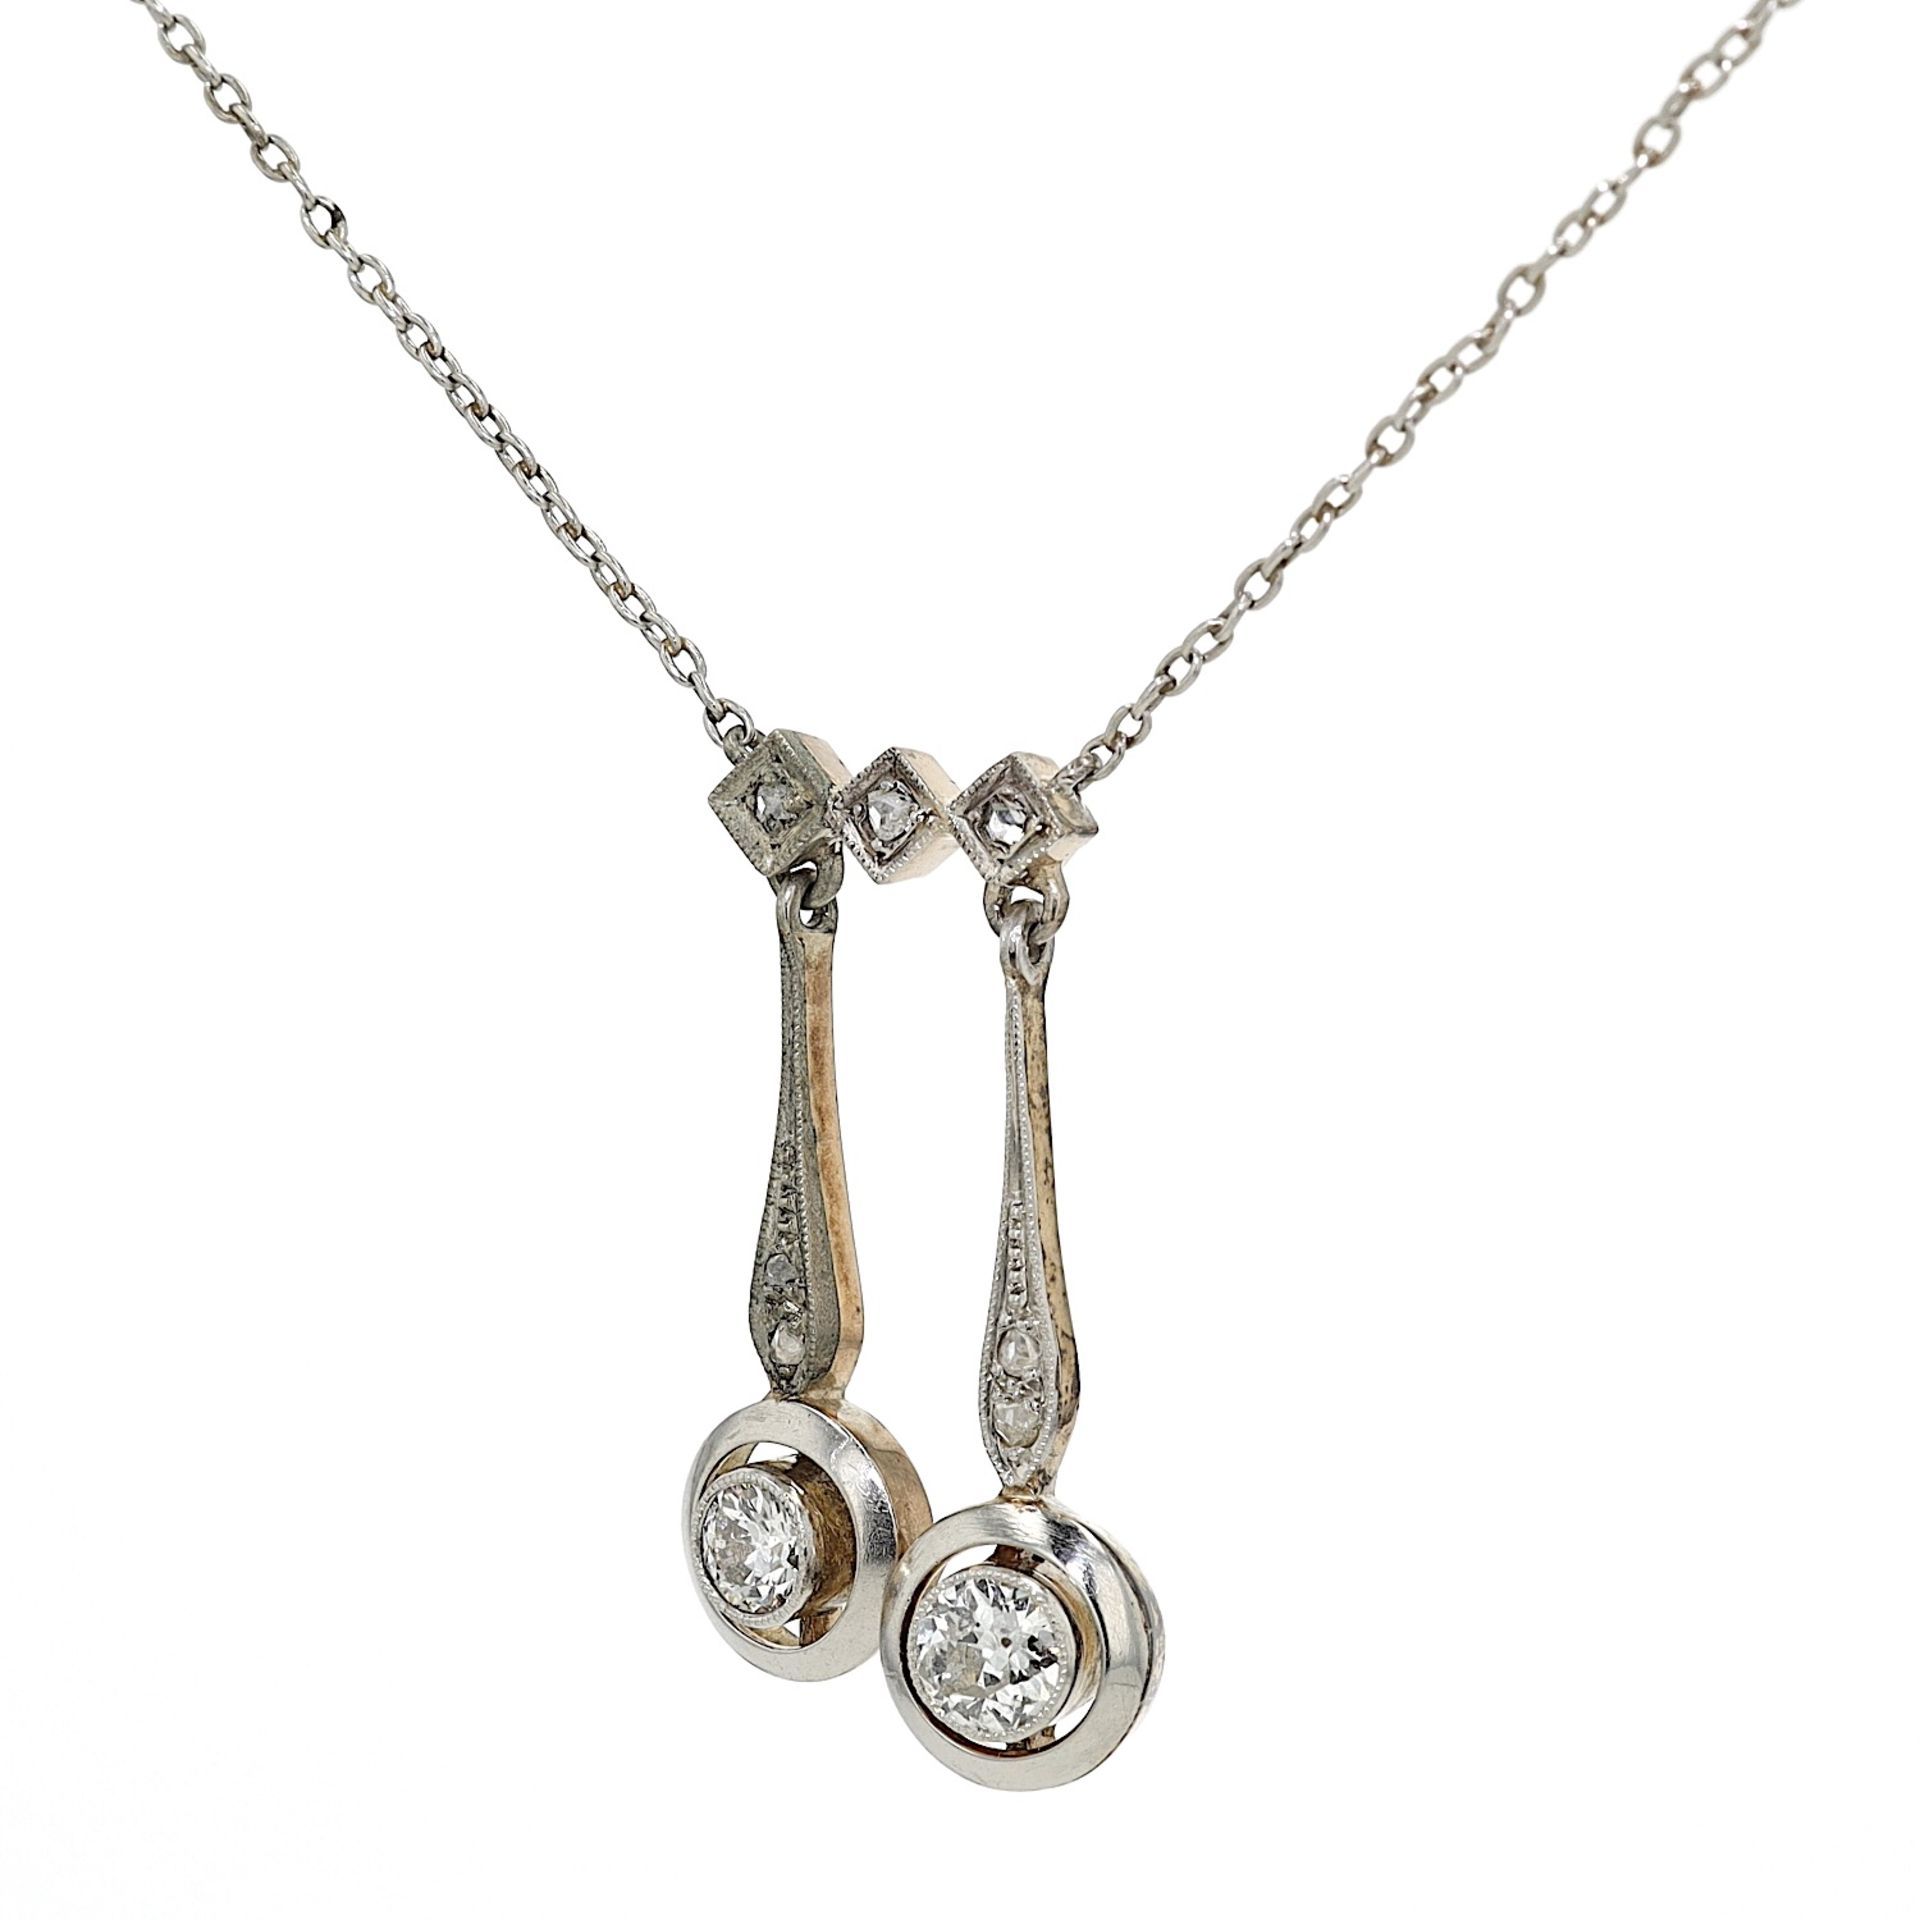 Necklace in platinum with diamonds - Image 2 of 4